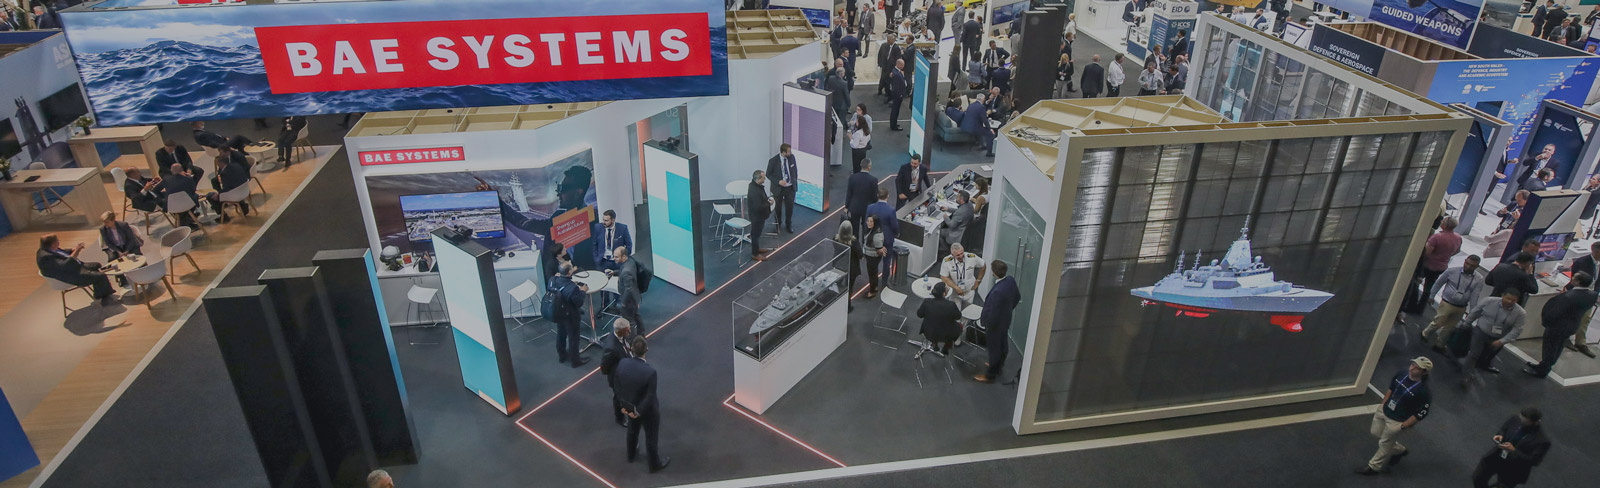 Photograph of BAE Systems stand at event